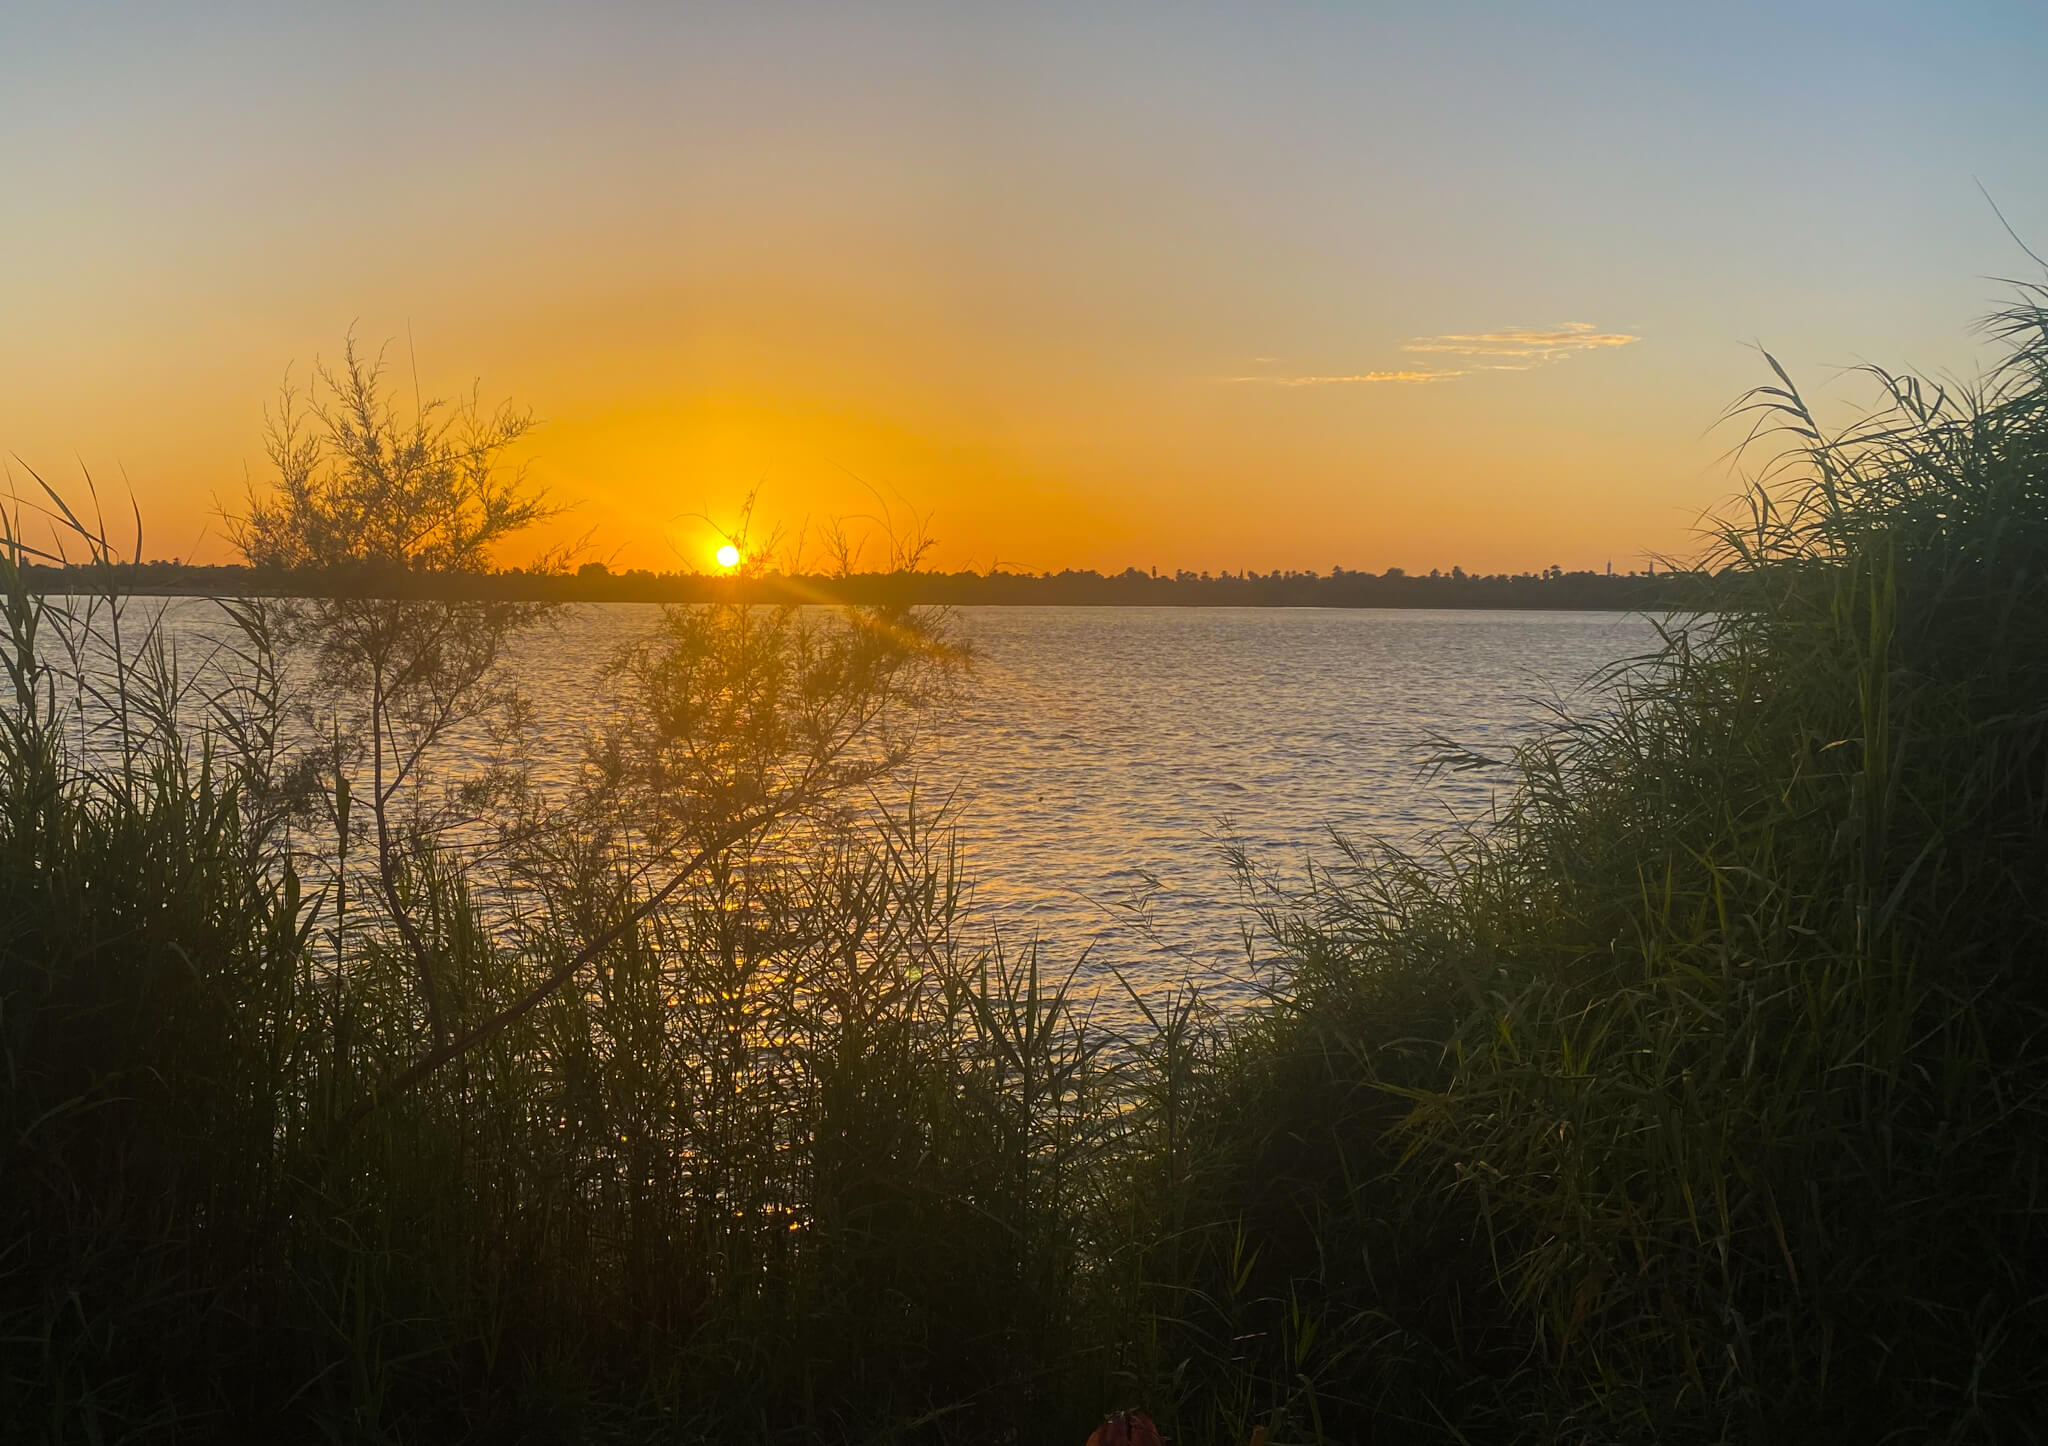 Sunset over the River Nile.